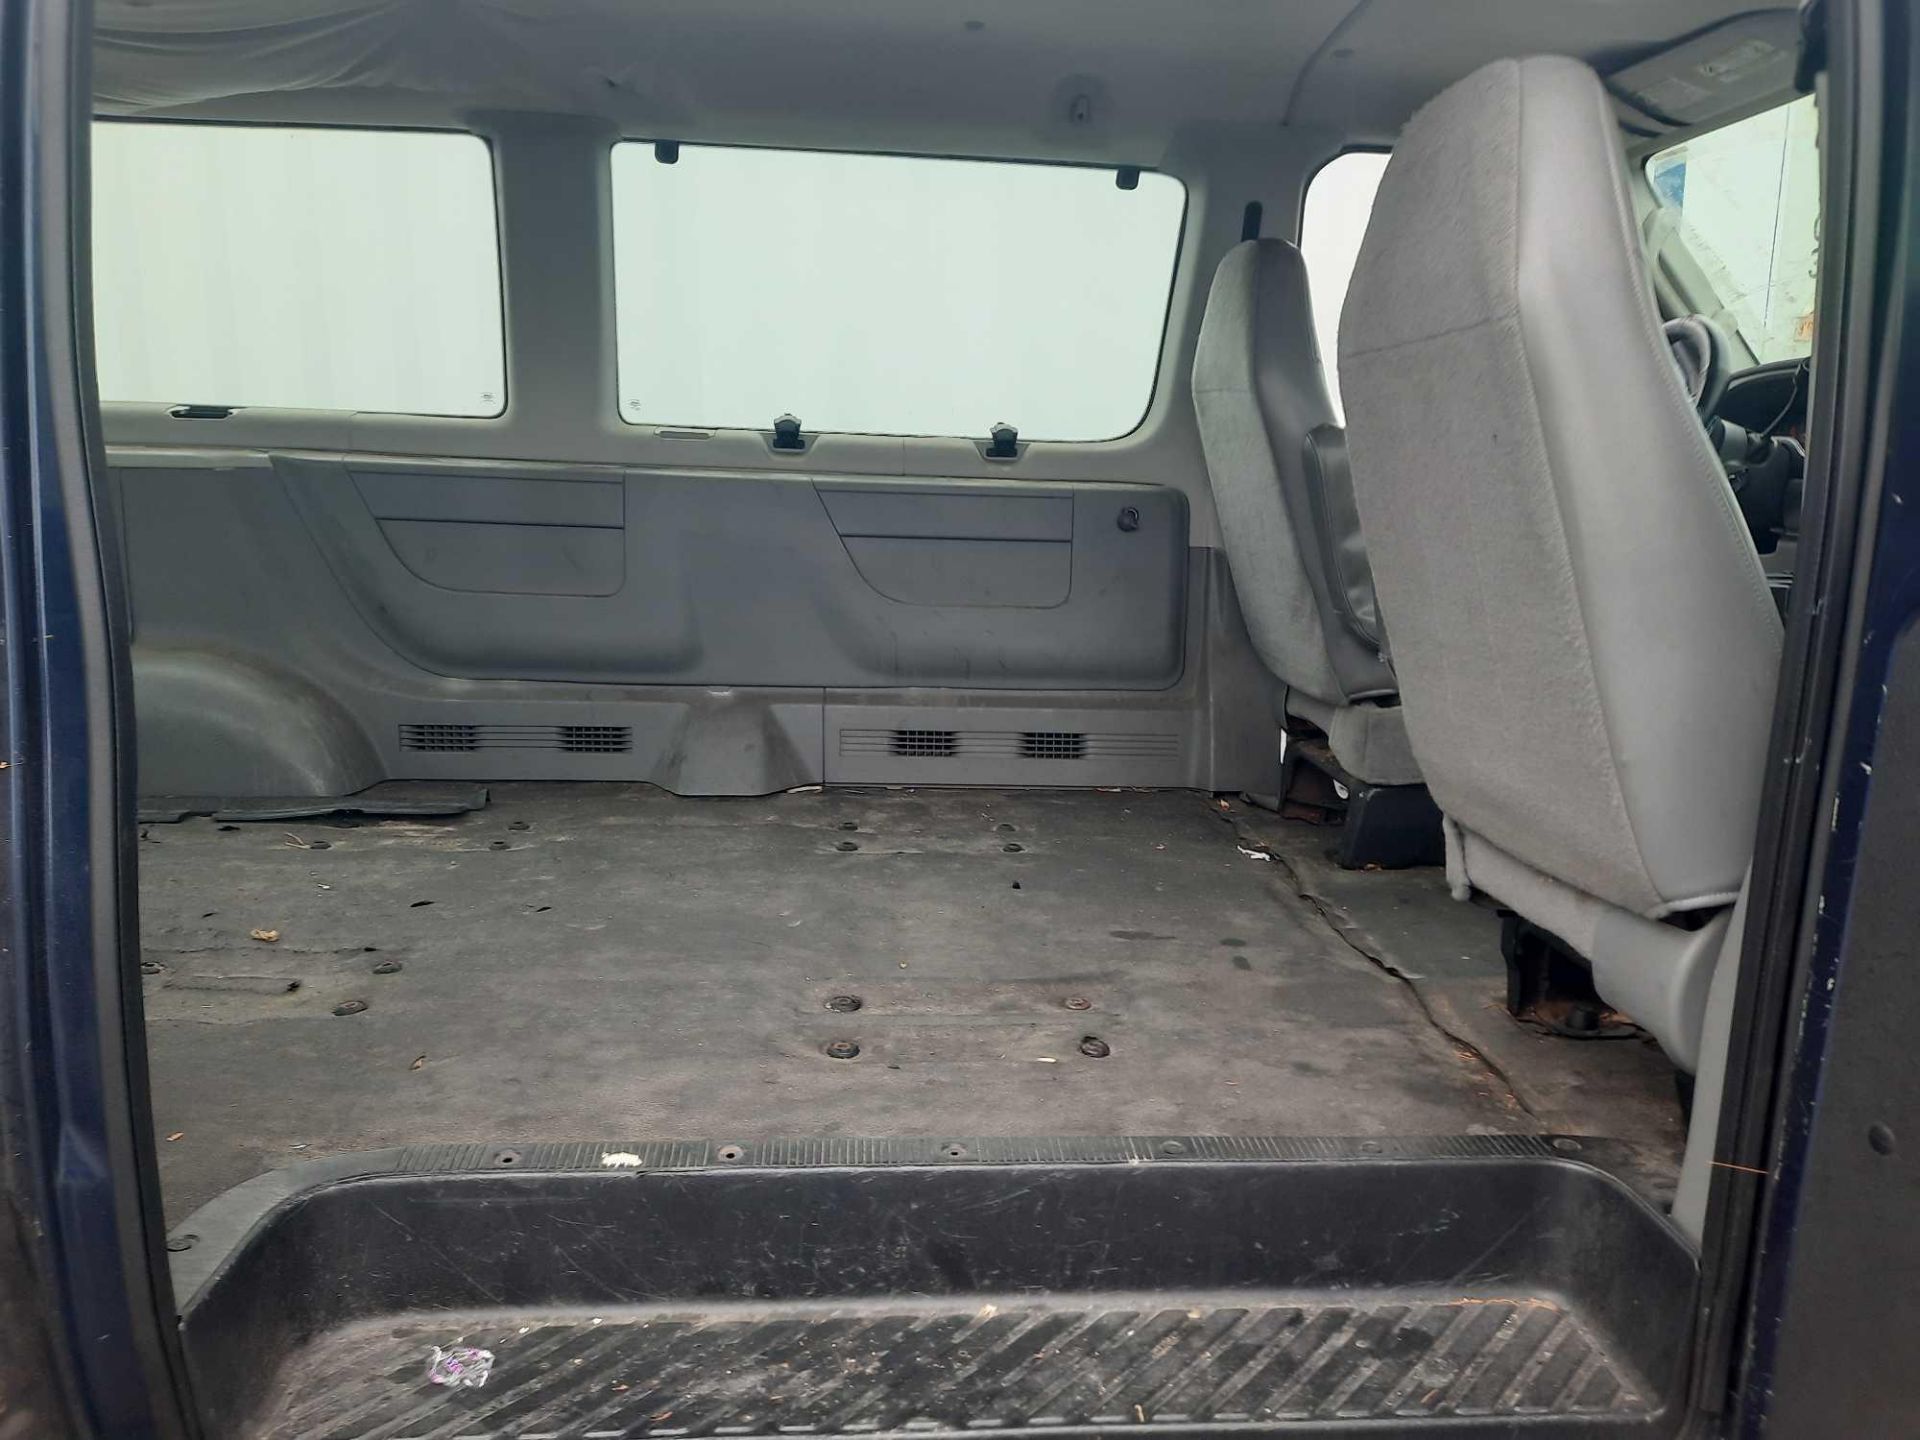 2006 Ford E350 Van - Image 14 of 15